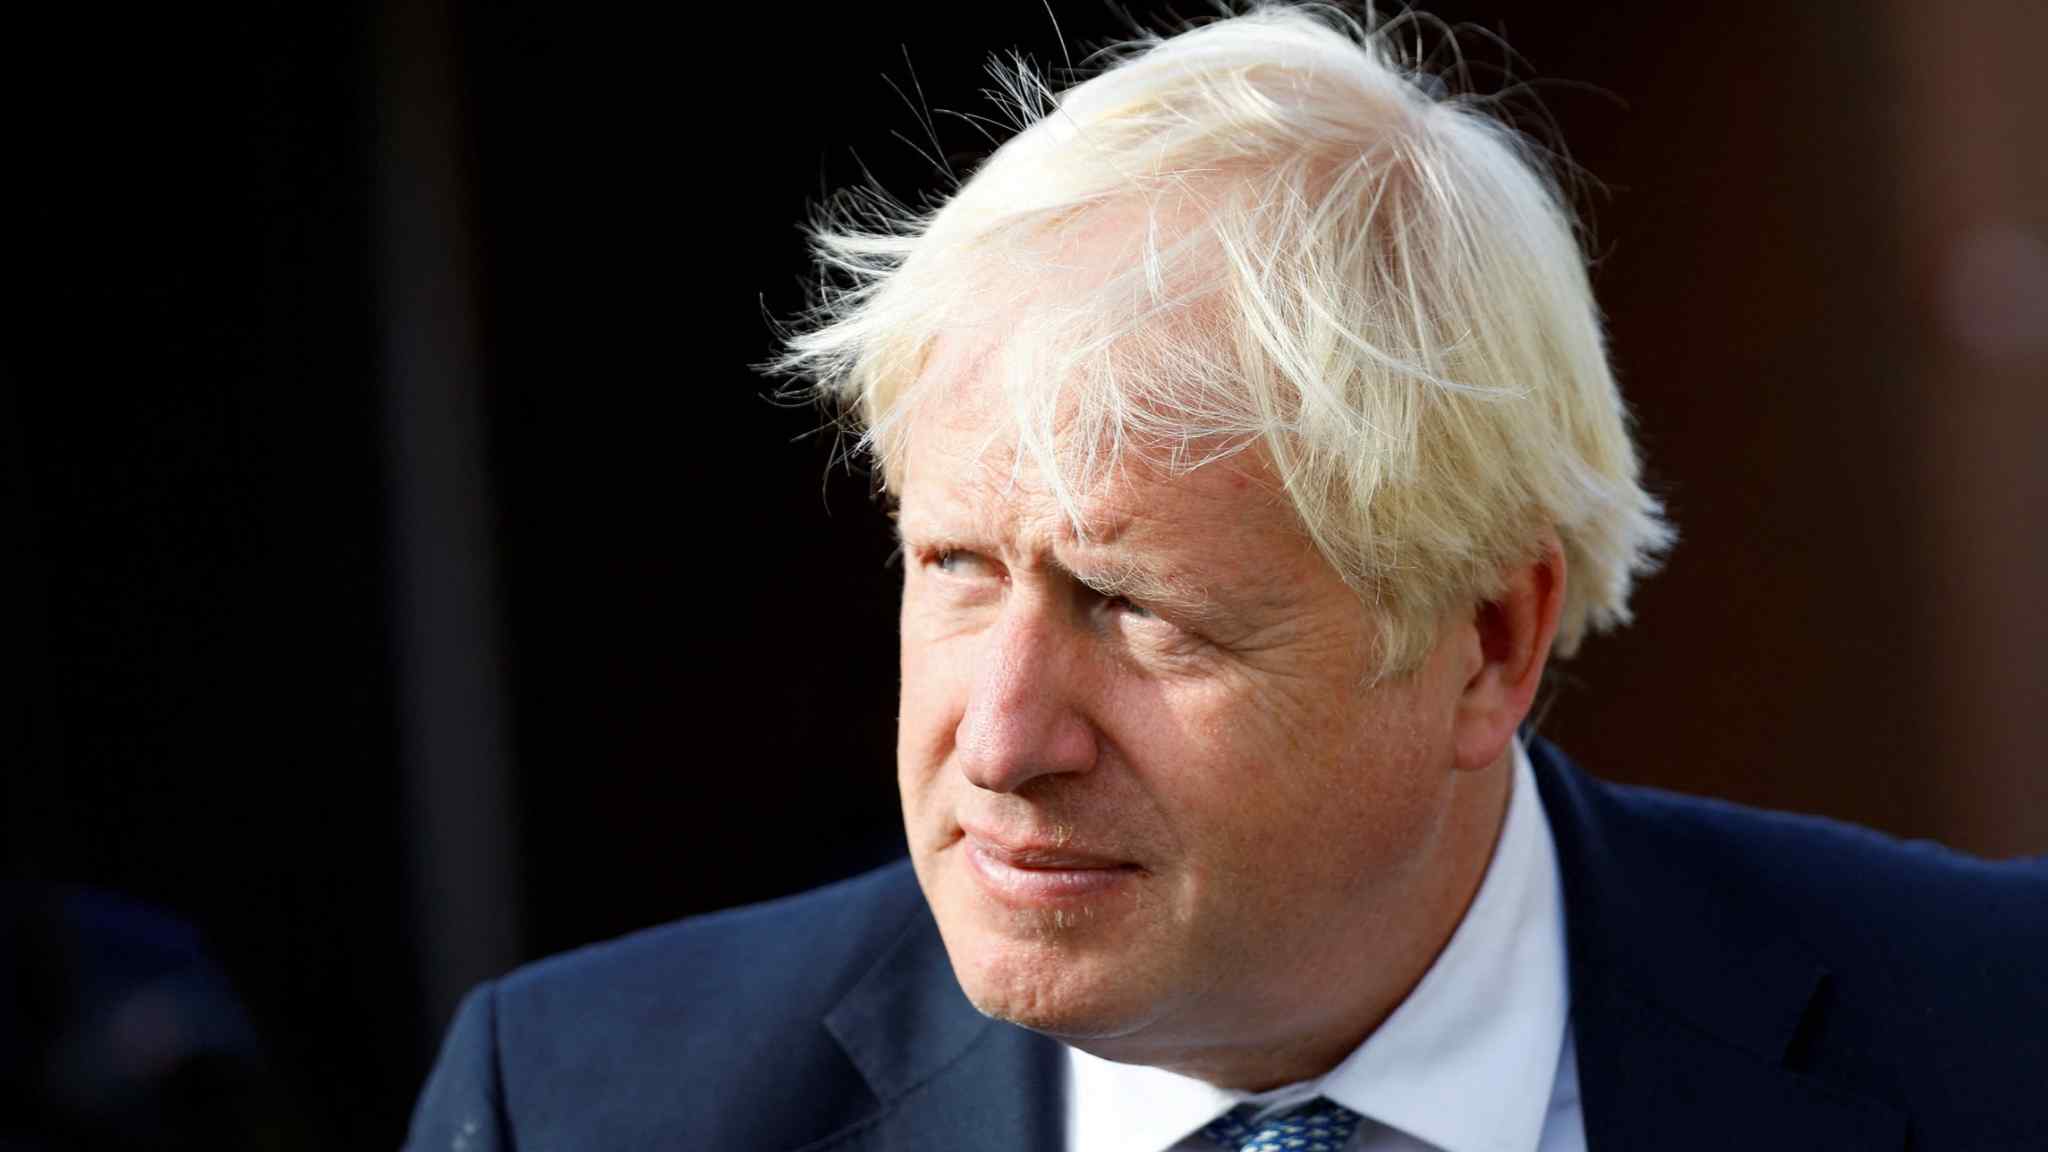 UK government takes legal action over Johnson’s Covid messages